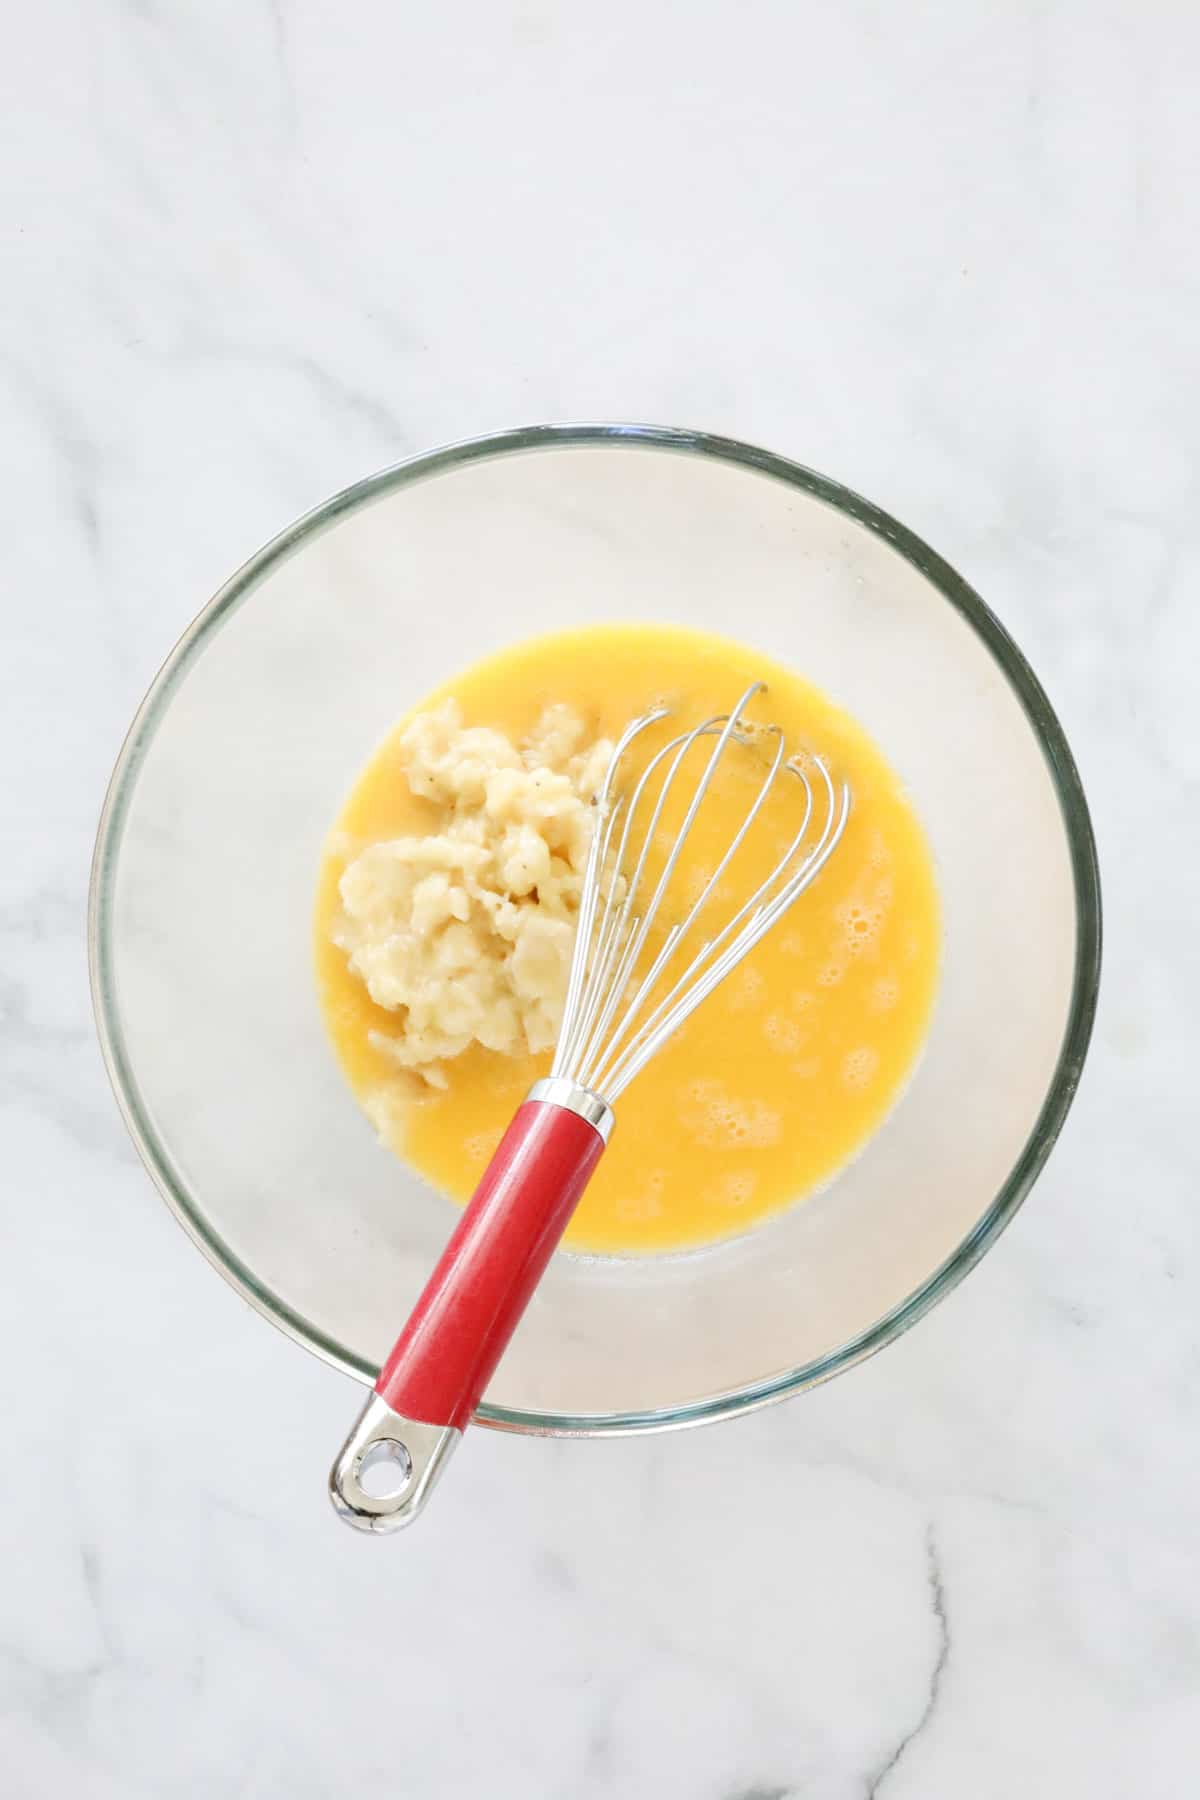 Mashed banana added to wet ingredients in a bowl with a whisk.